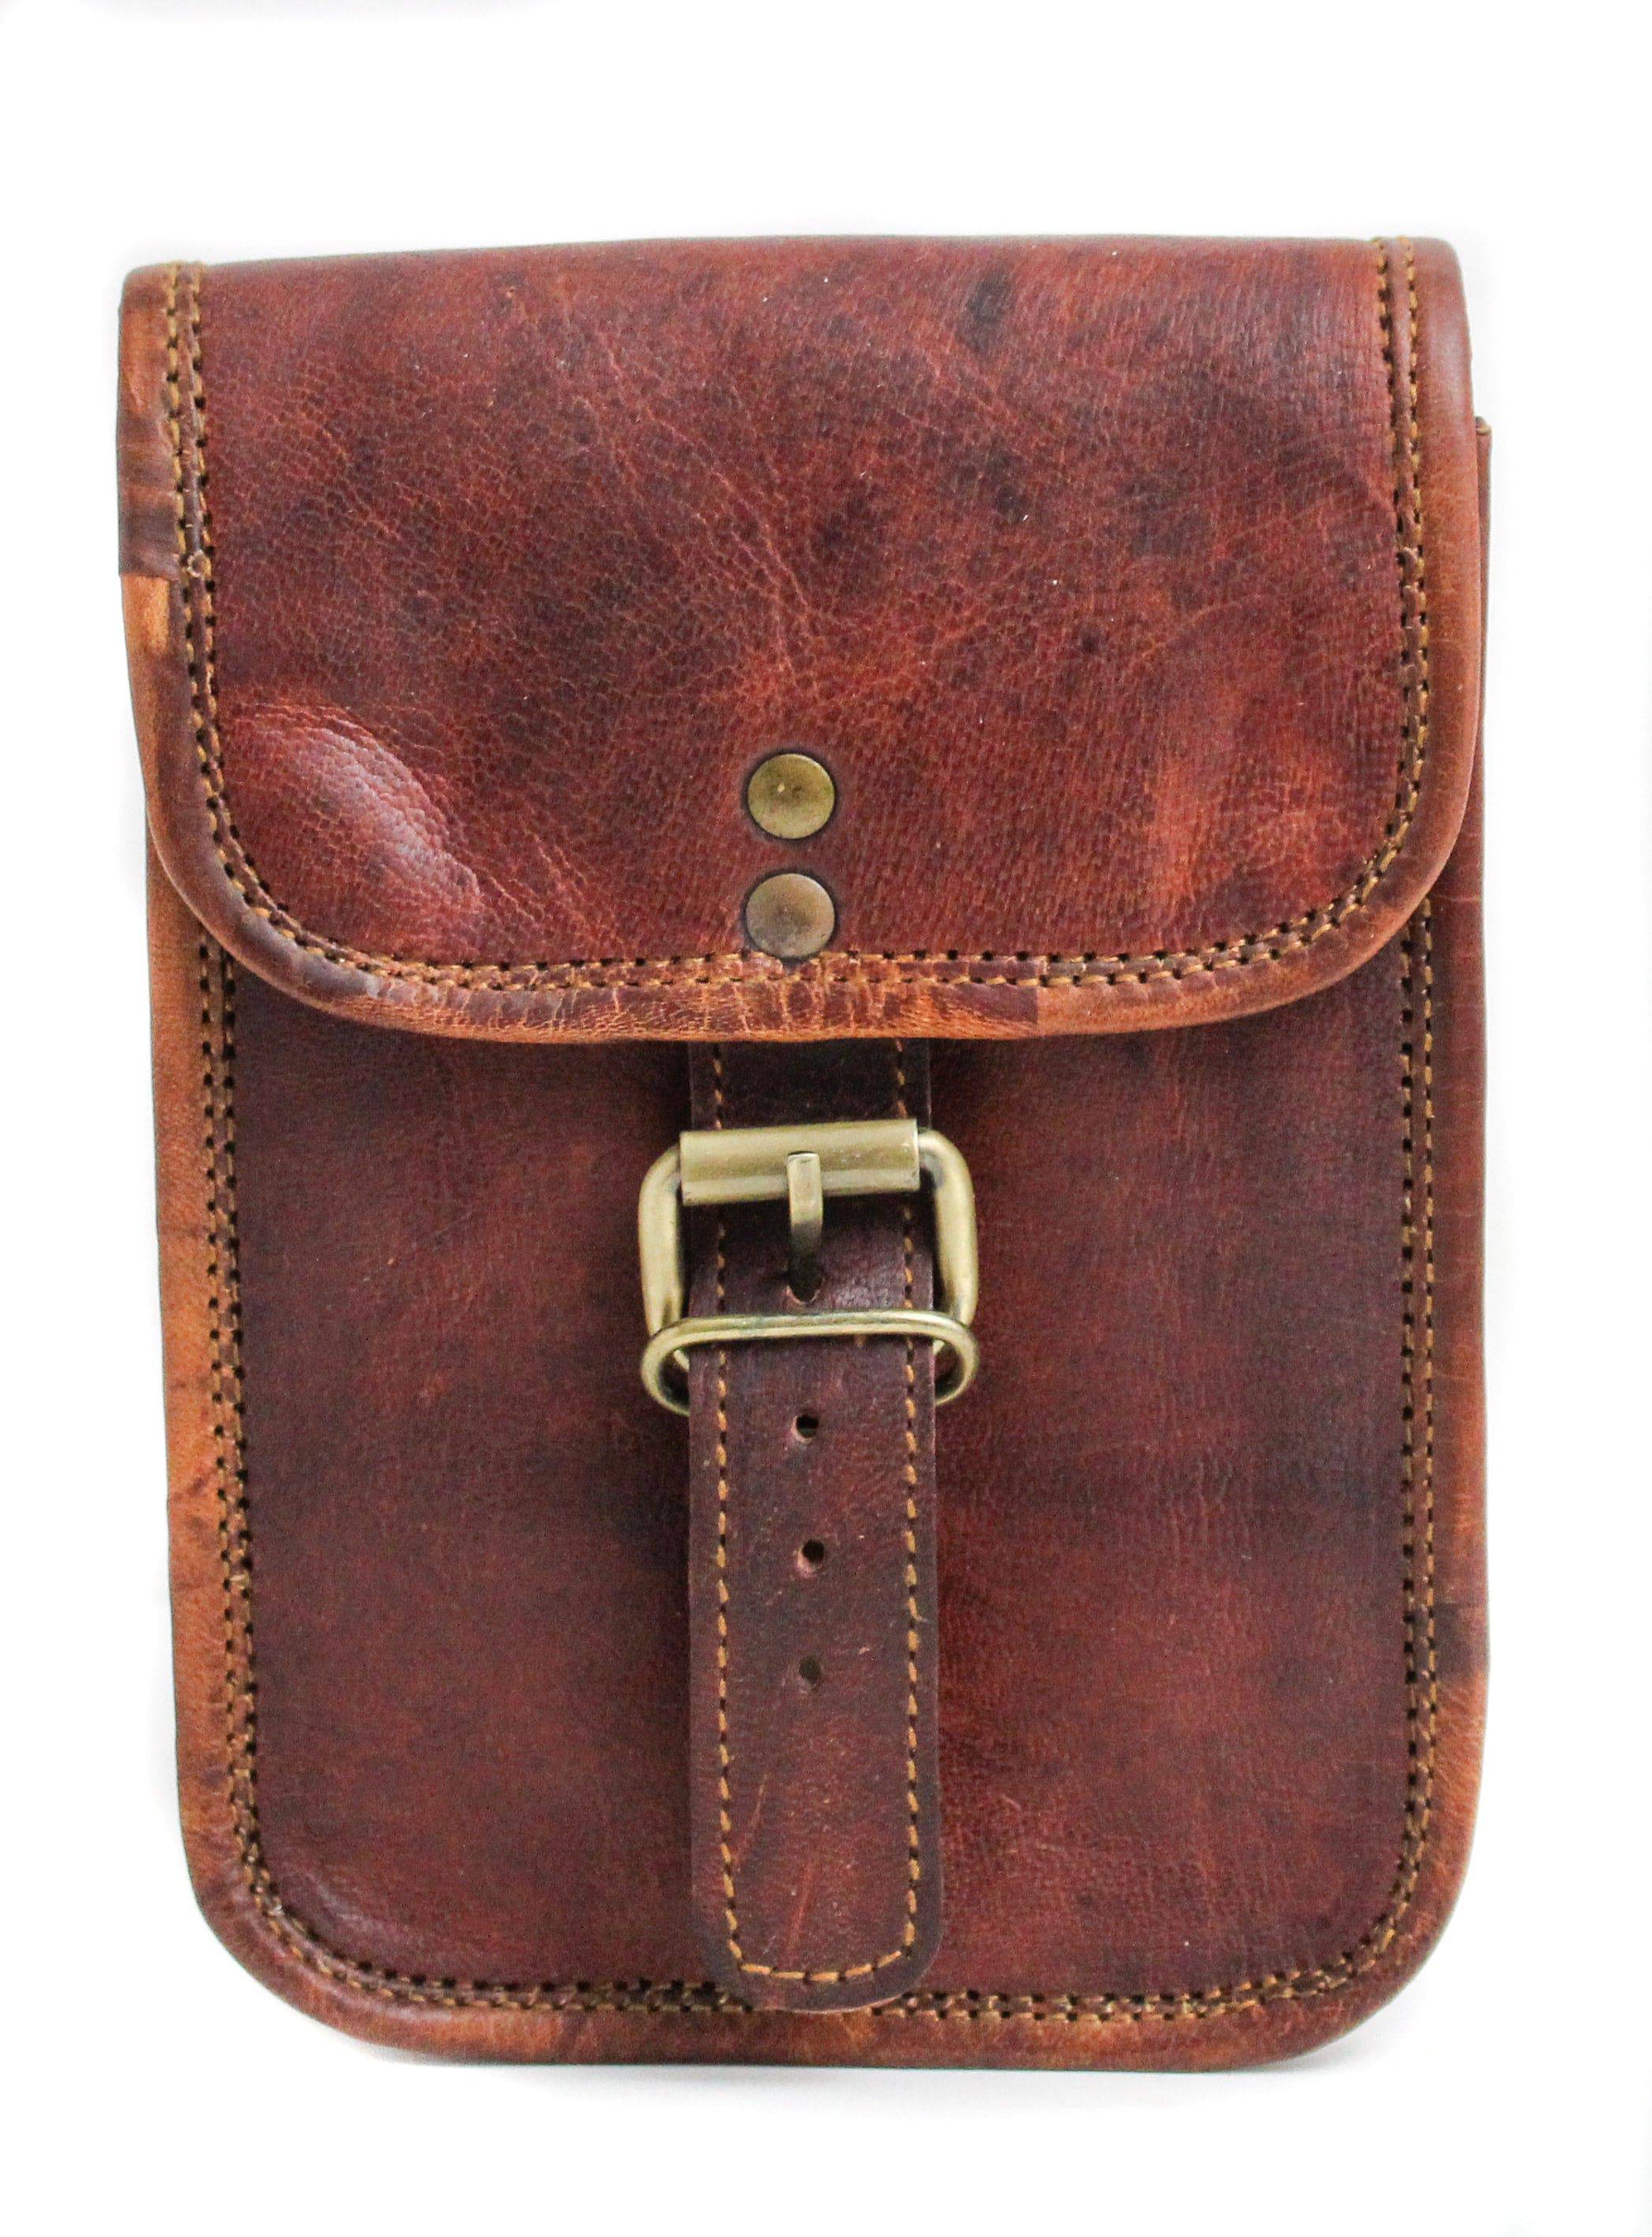 7" TALL LEATHER SATCHEL - Out of the Blue